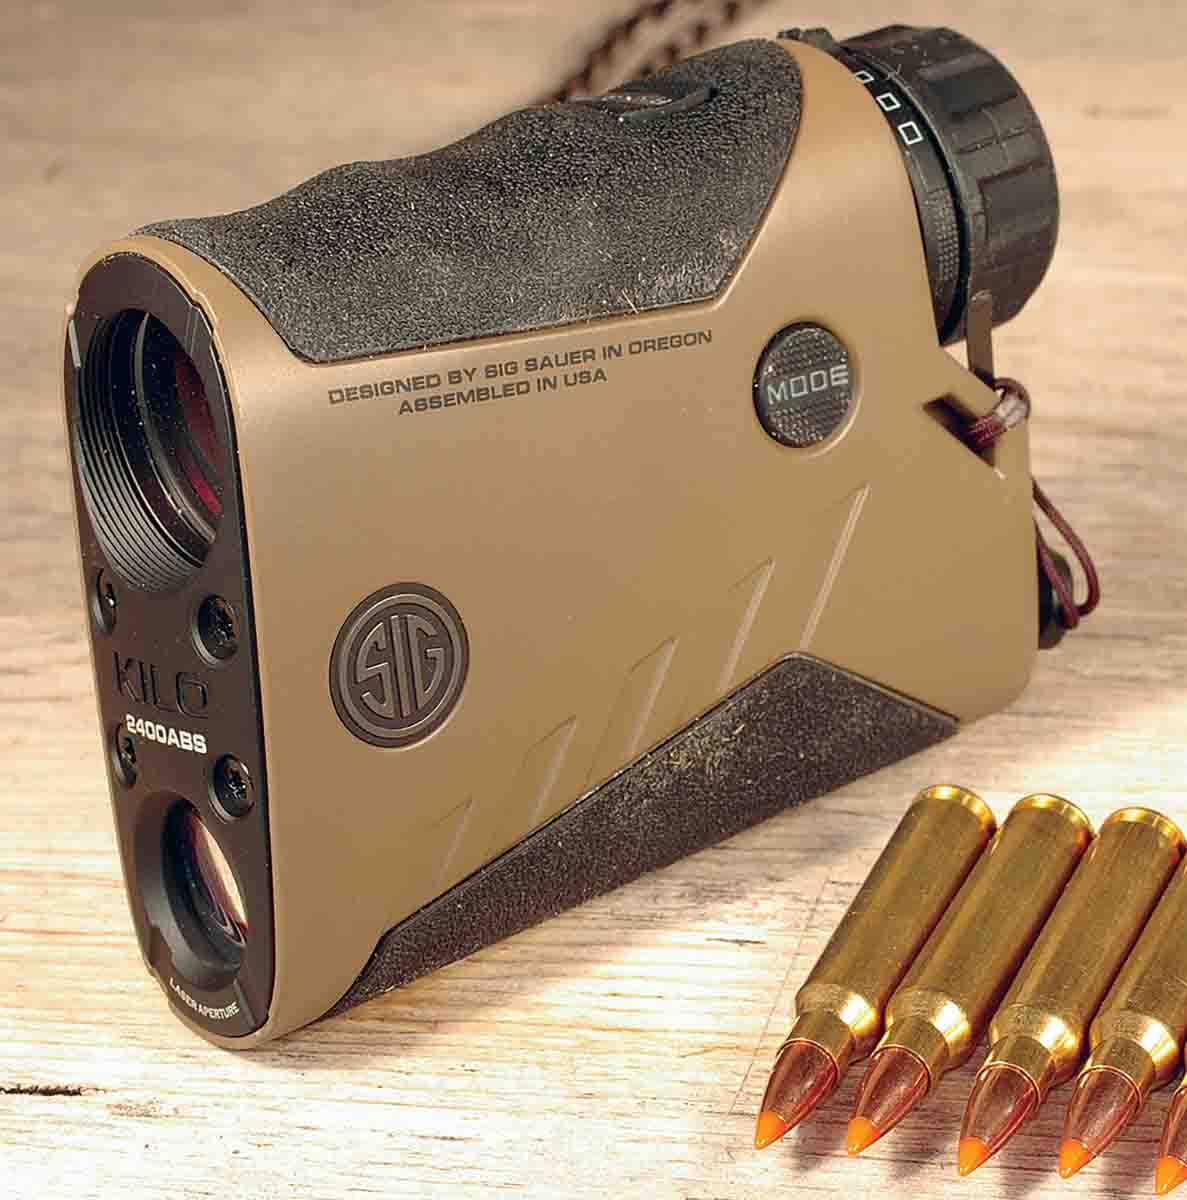 Ballistic information can be downloaded to a KILO2400ABS rangefinder so it also displays compensation for distance and wind at a specific range.